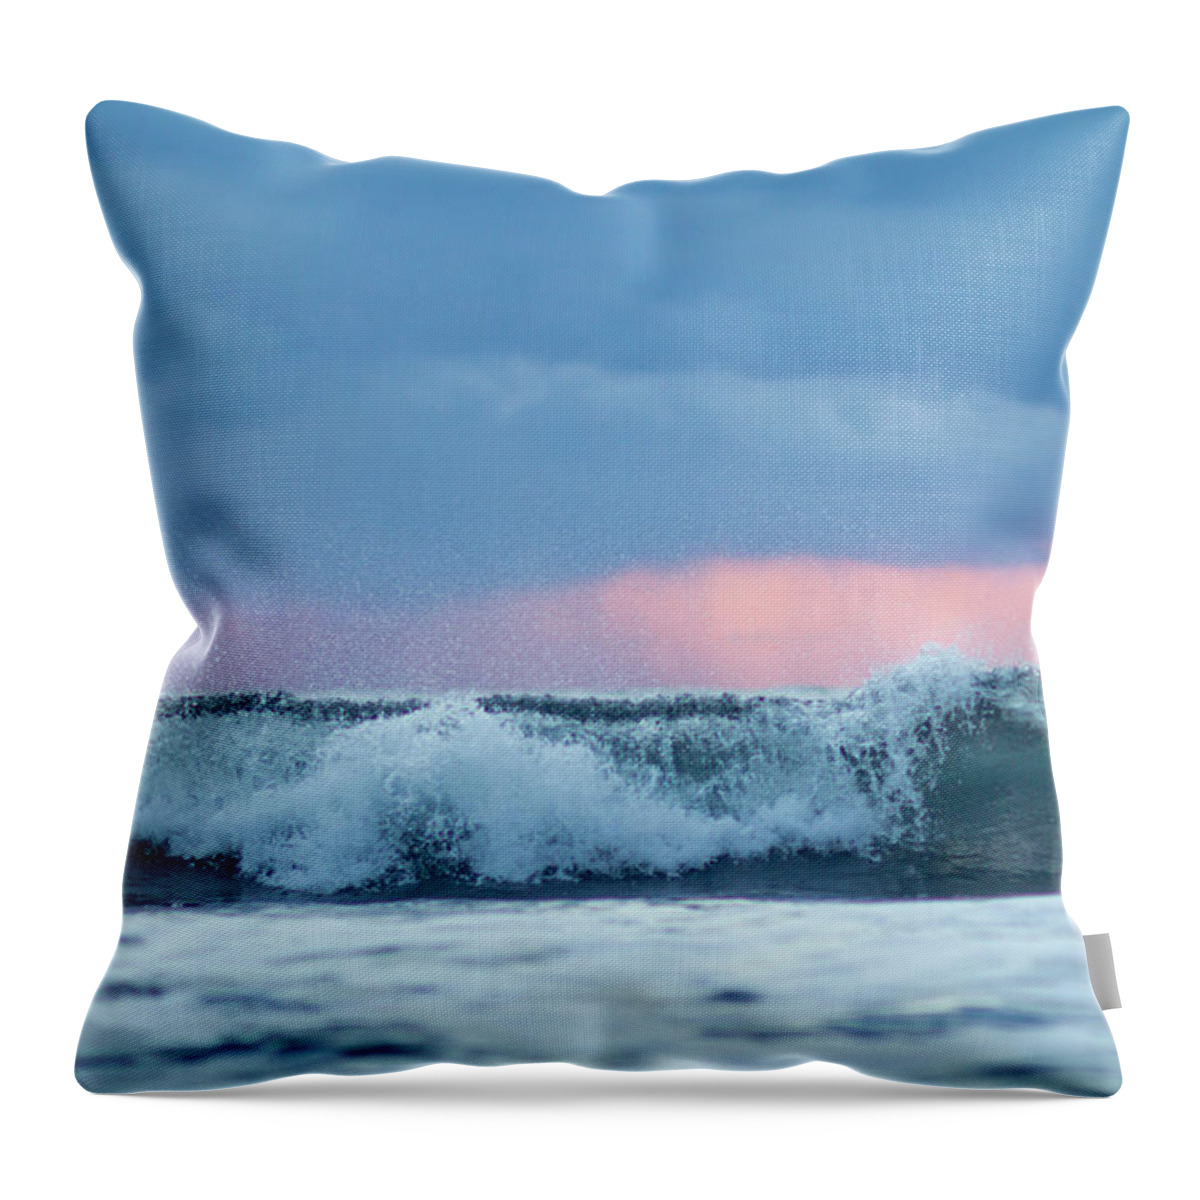 Scenics Throw Pillow featuring the photograph Particle Of The Wave by Mojao